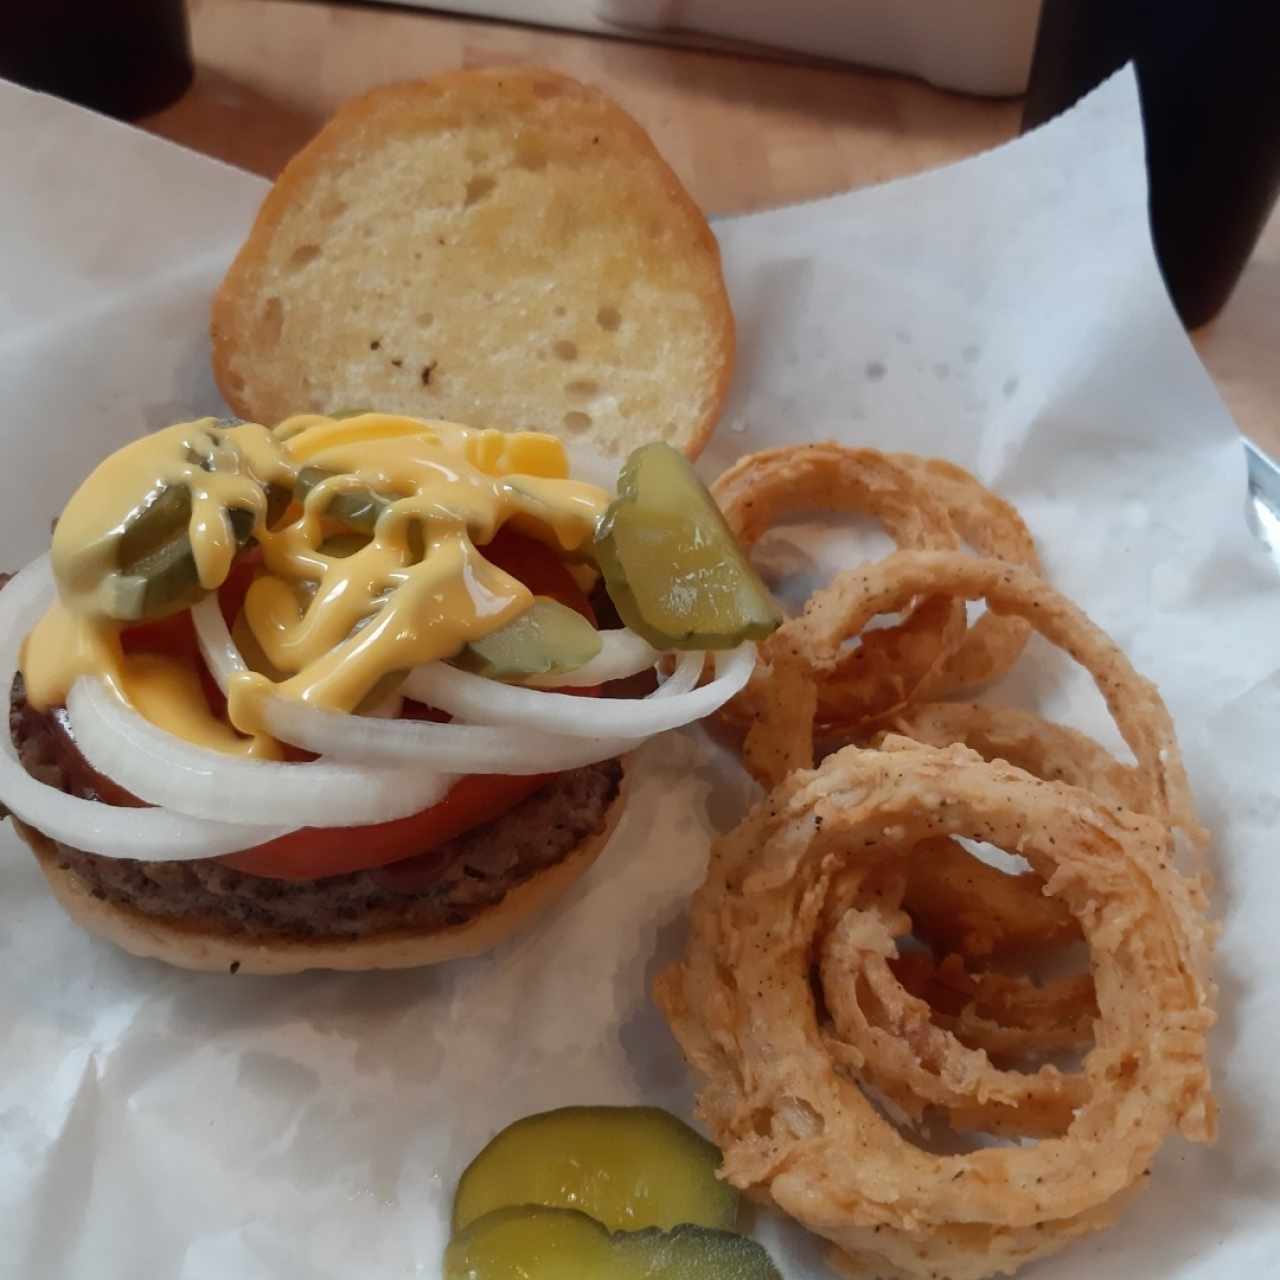 Original Burger with Onion Rings